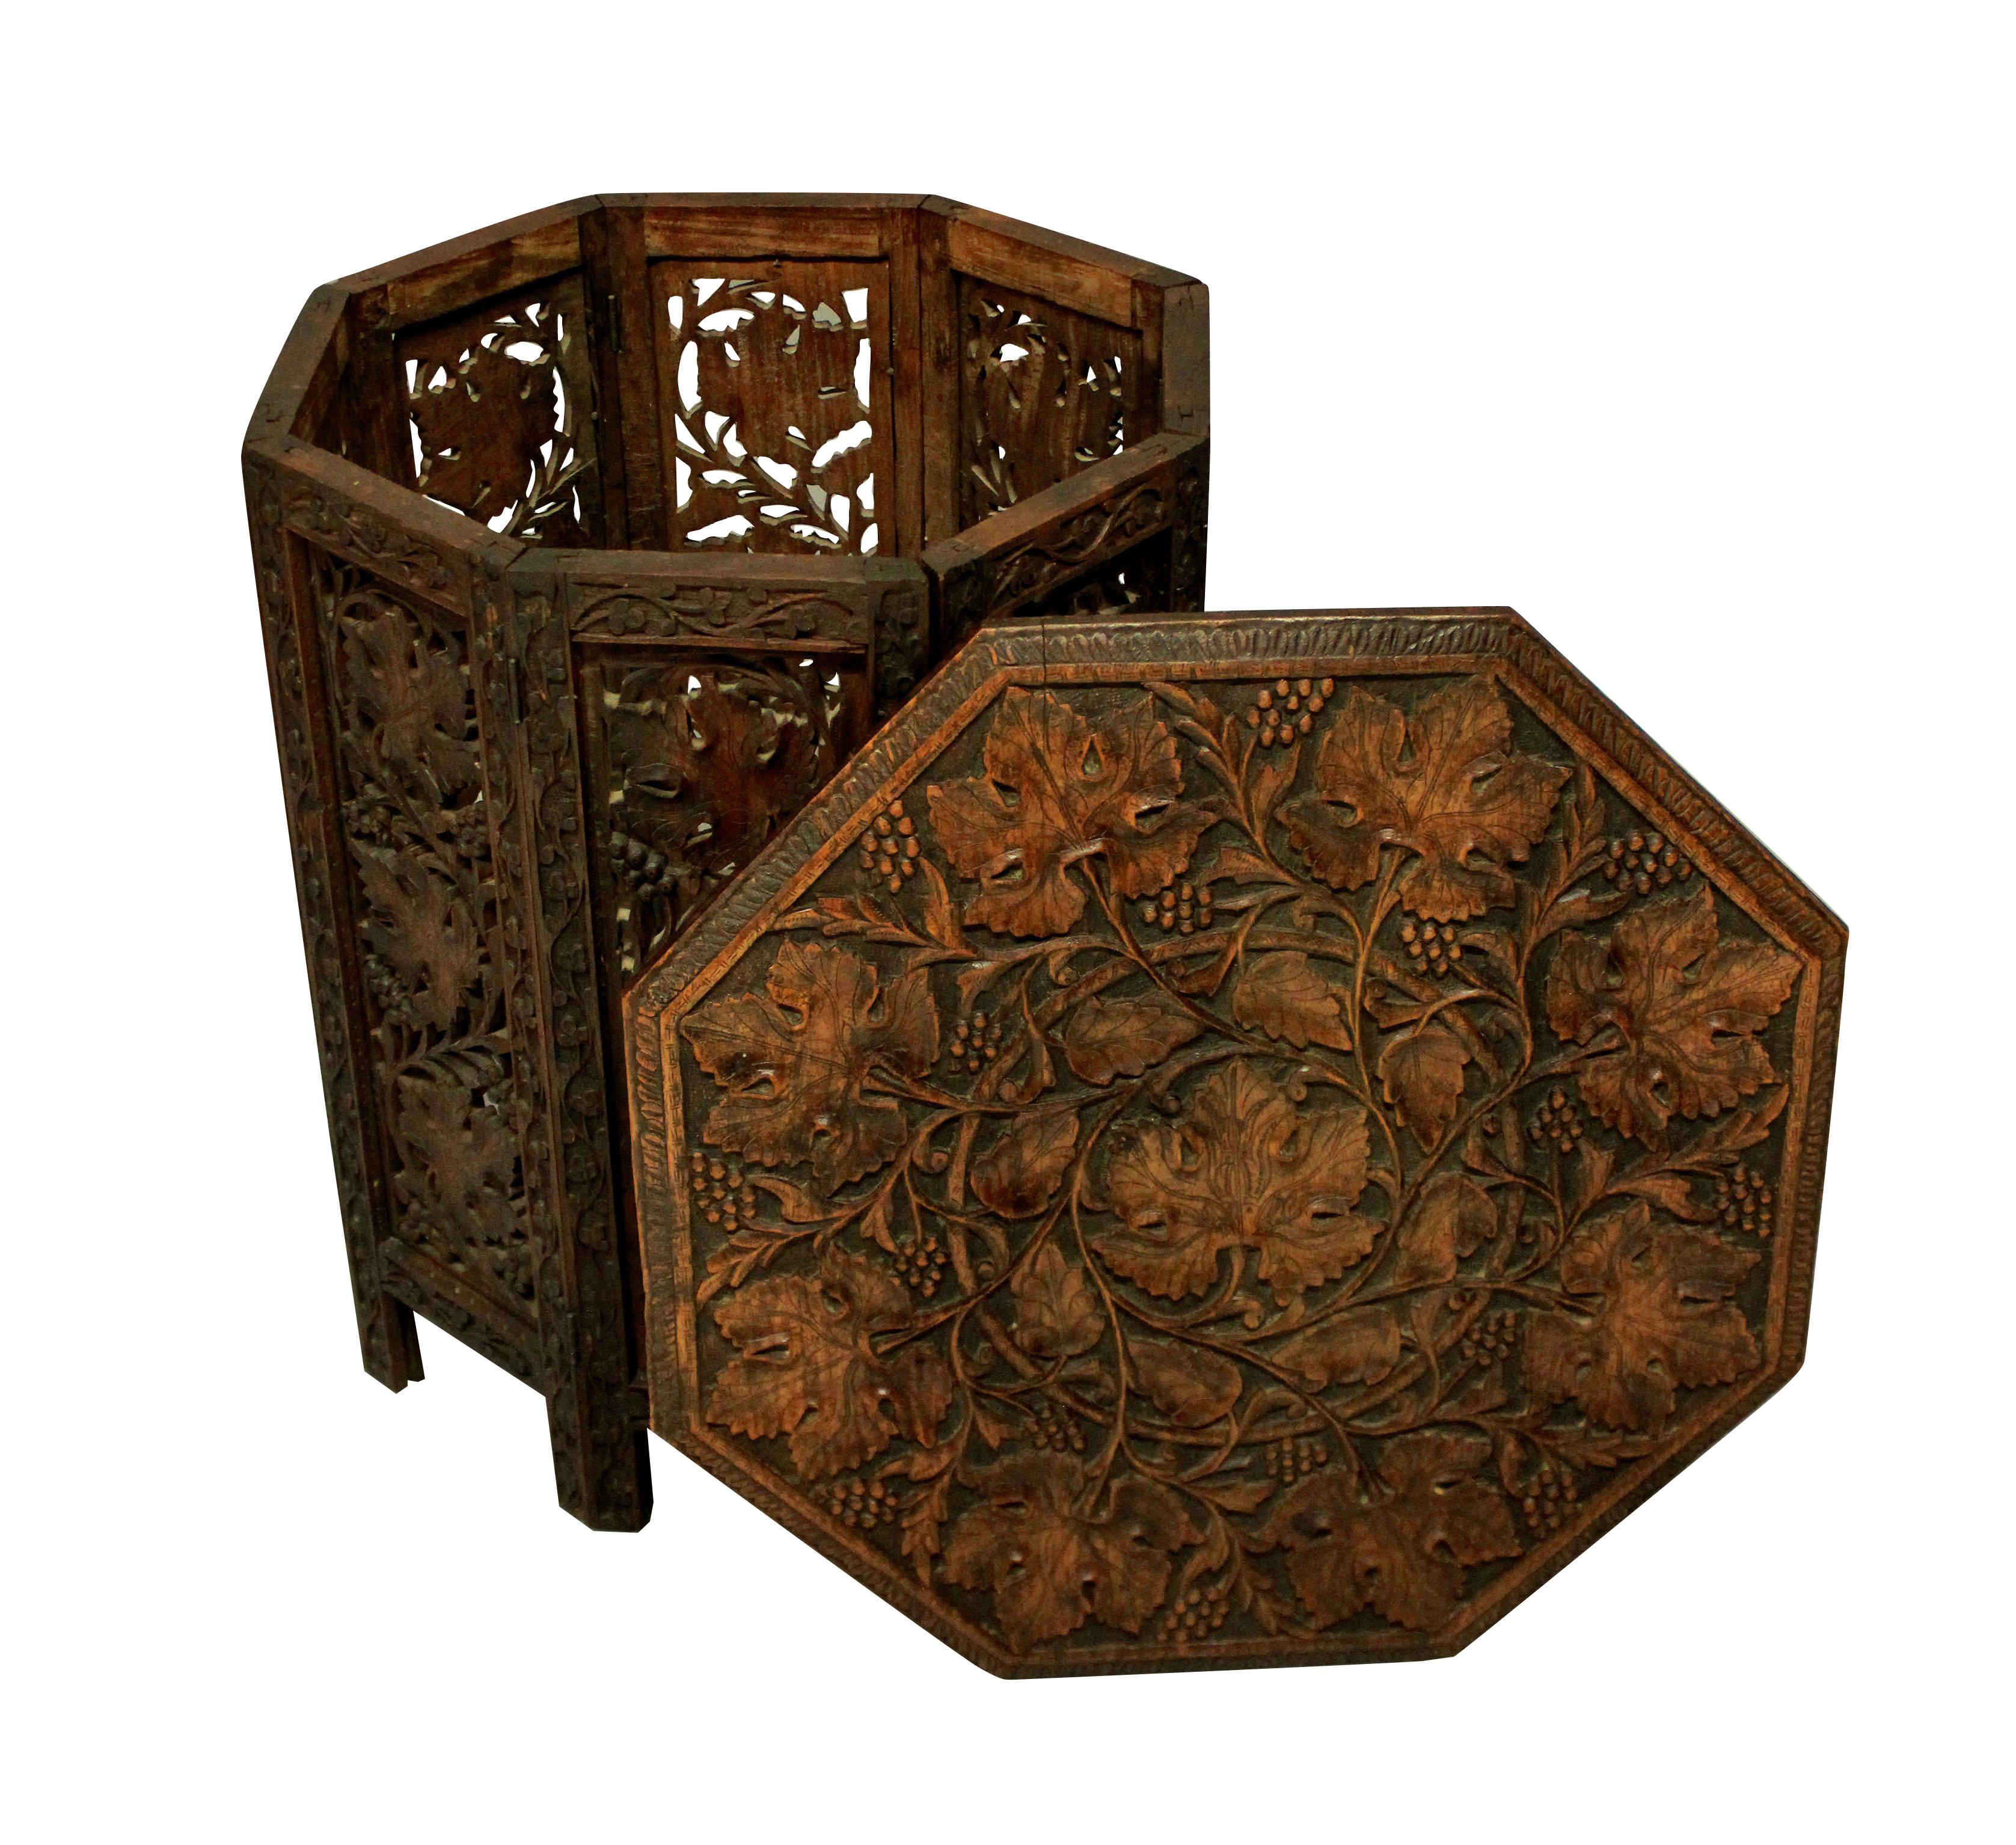 A beautifully carved Moorish side table, which folds flat for travelling. Depicting vines, it has a good original patina.